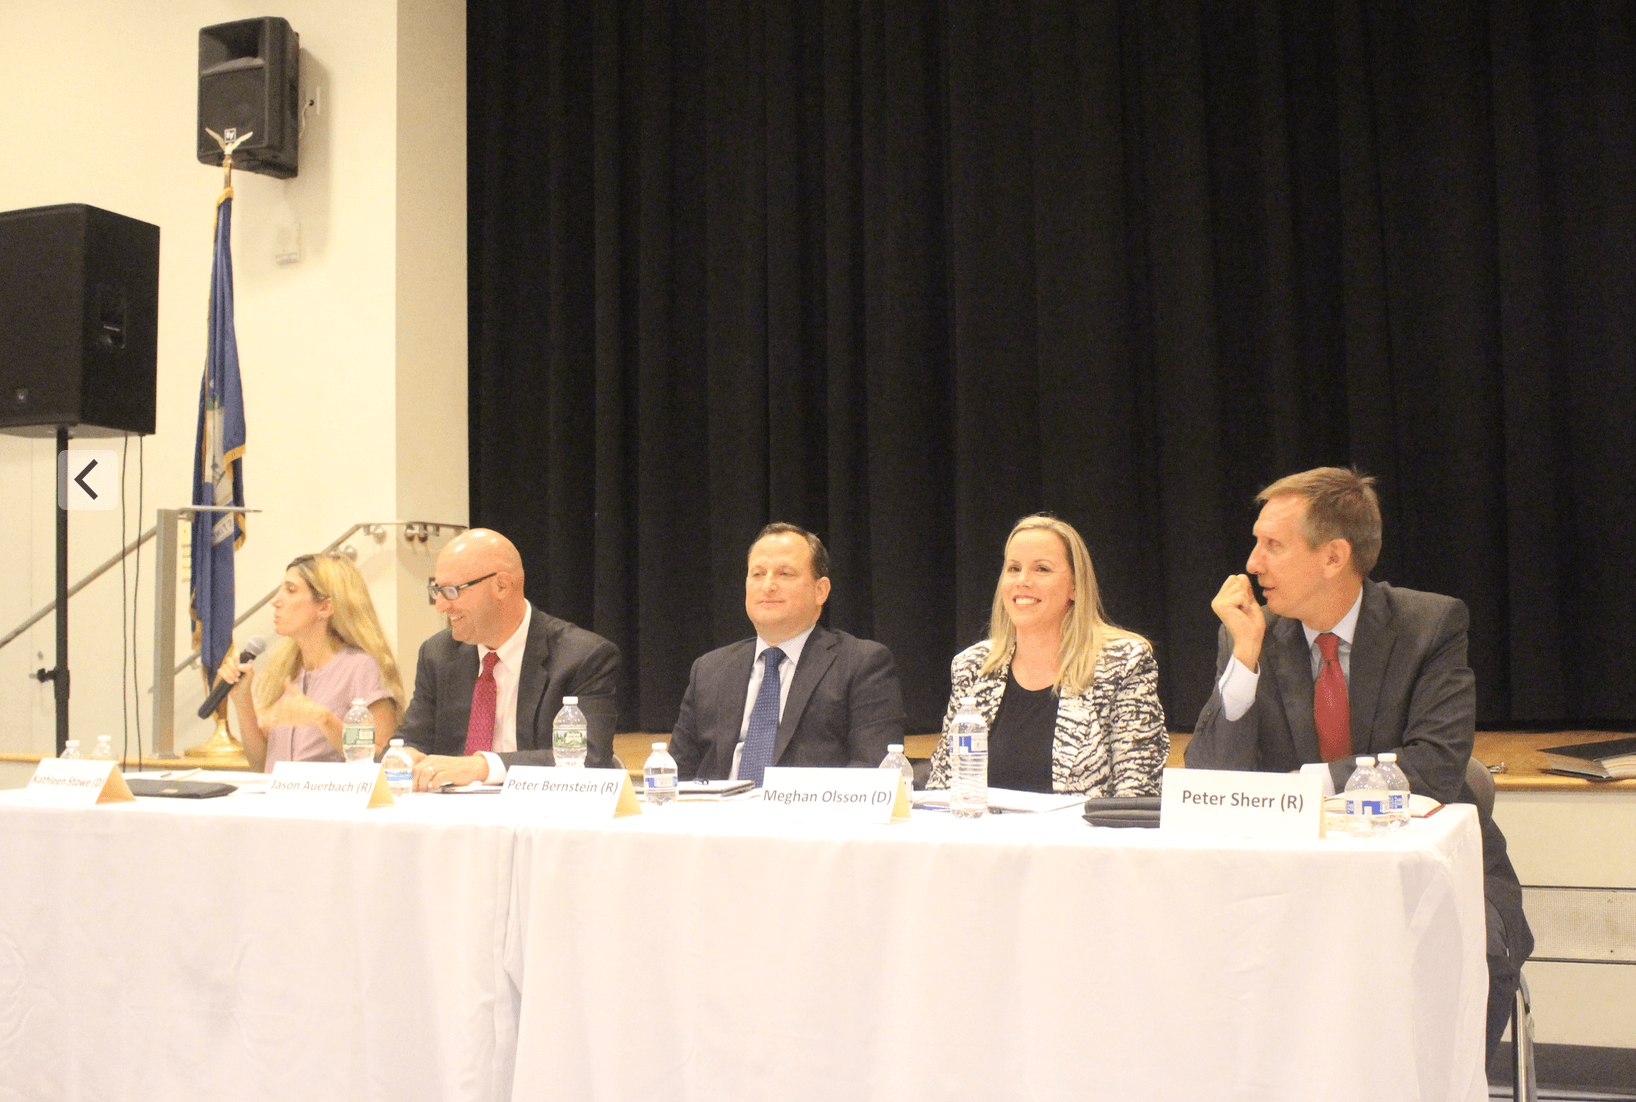 Kathleen Stowe, Jason Auerbach, Peter Bernstein, Meghan Olsson and Peter Sherr, candidates for Board of Education. Oct 11, 2017 Photo: Leslie Yager